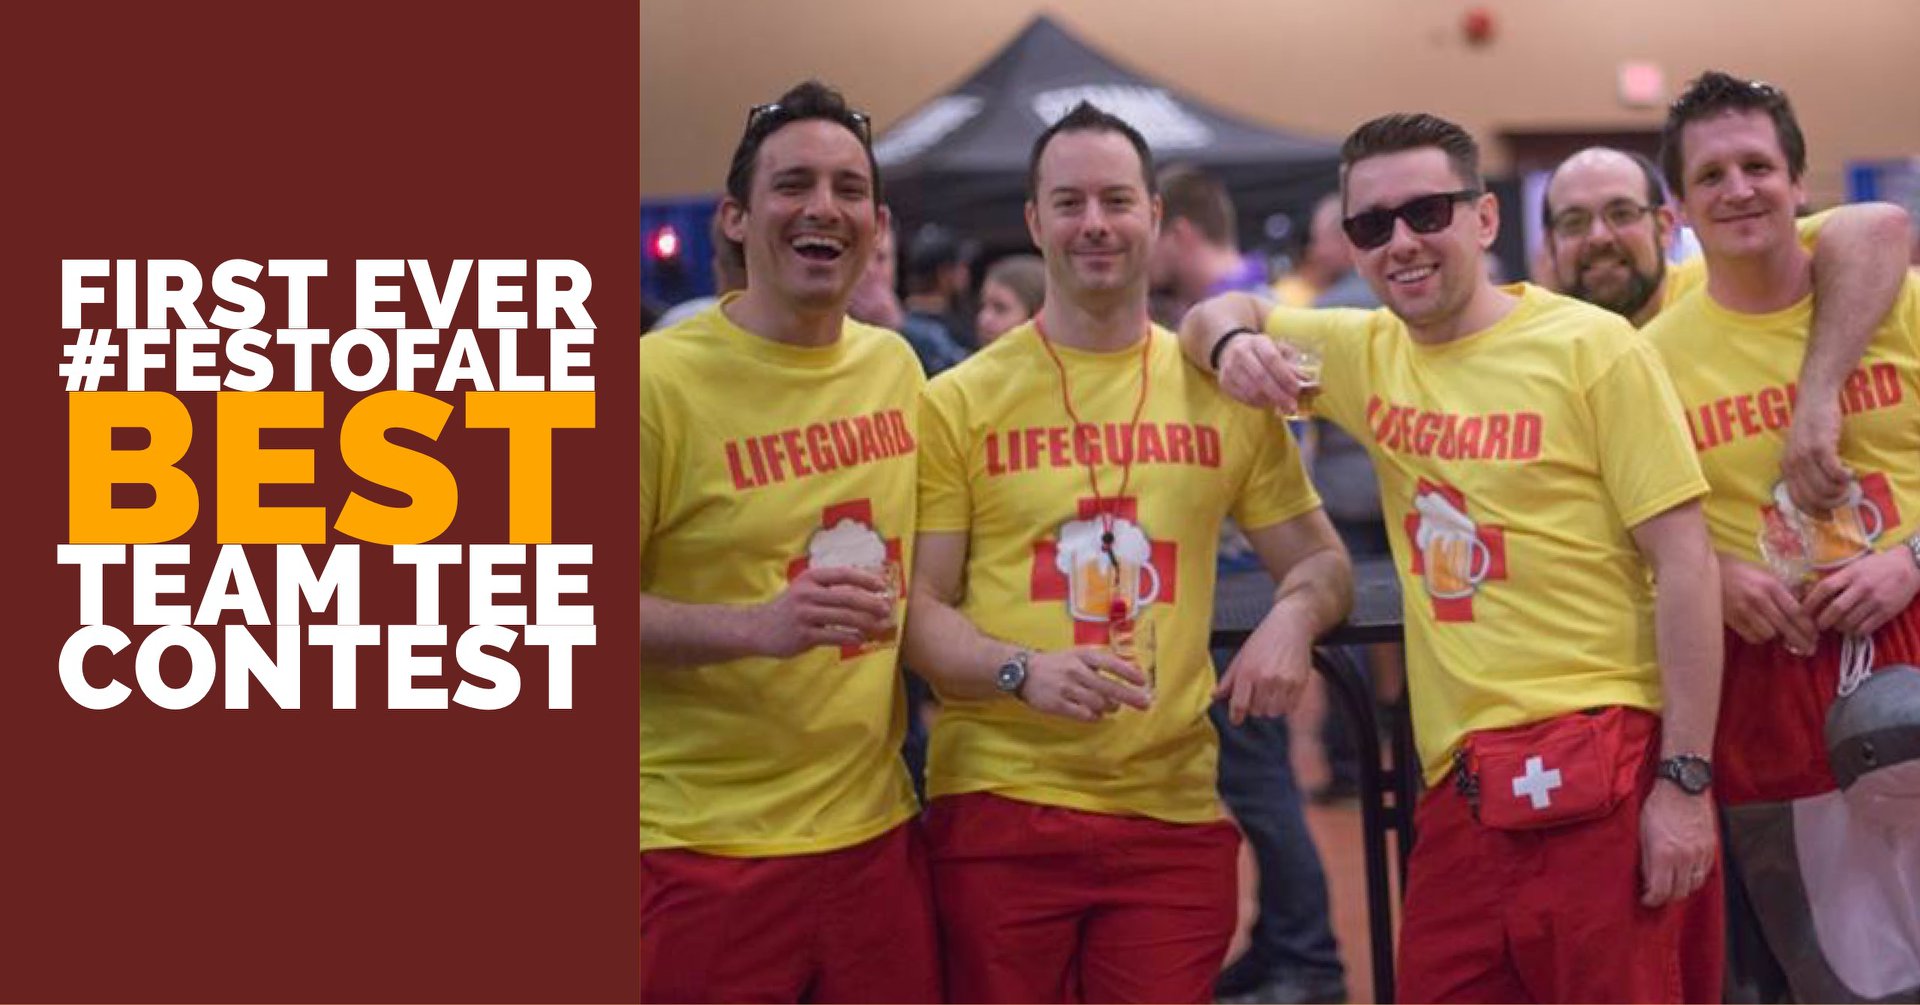 Featured image for “First Ever Fest of Ale Best Team Tee”